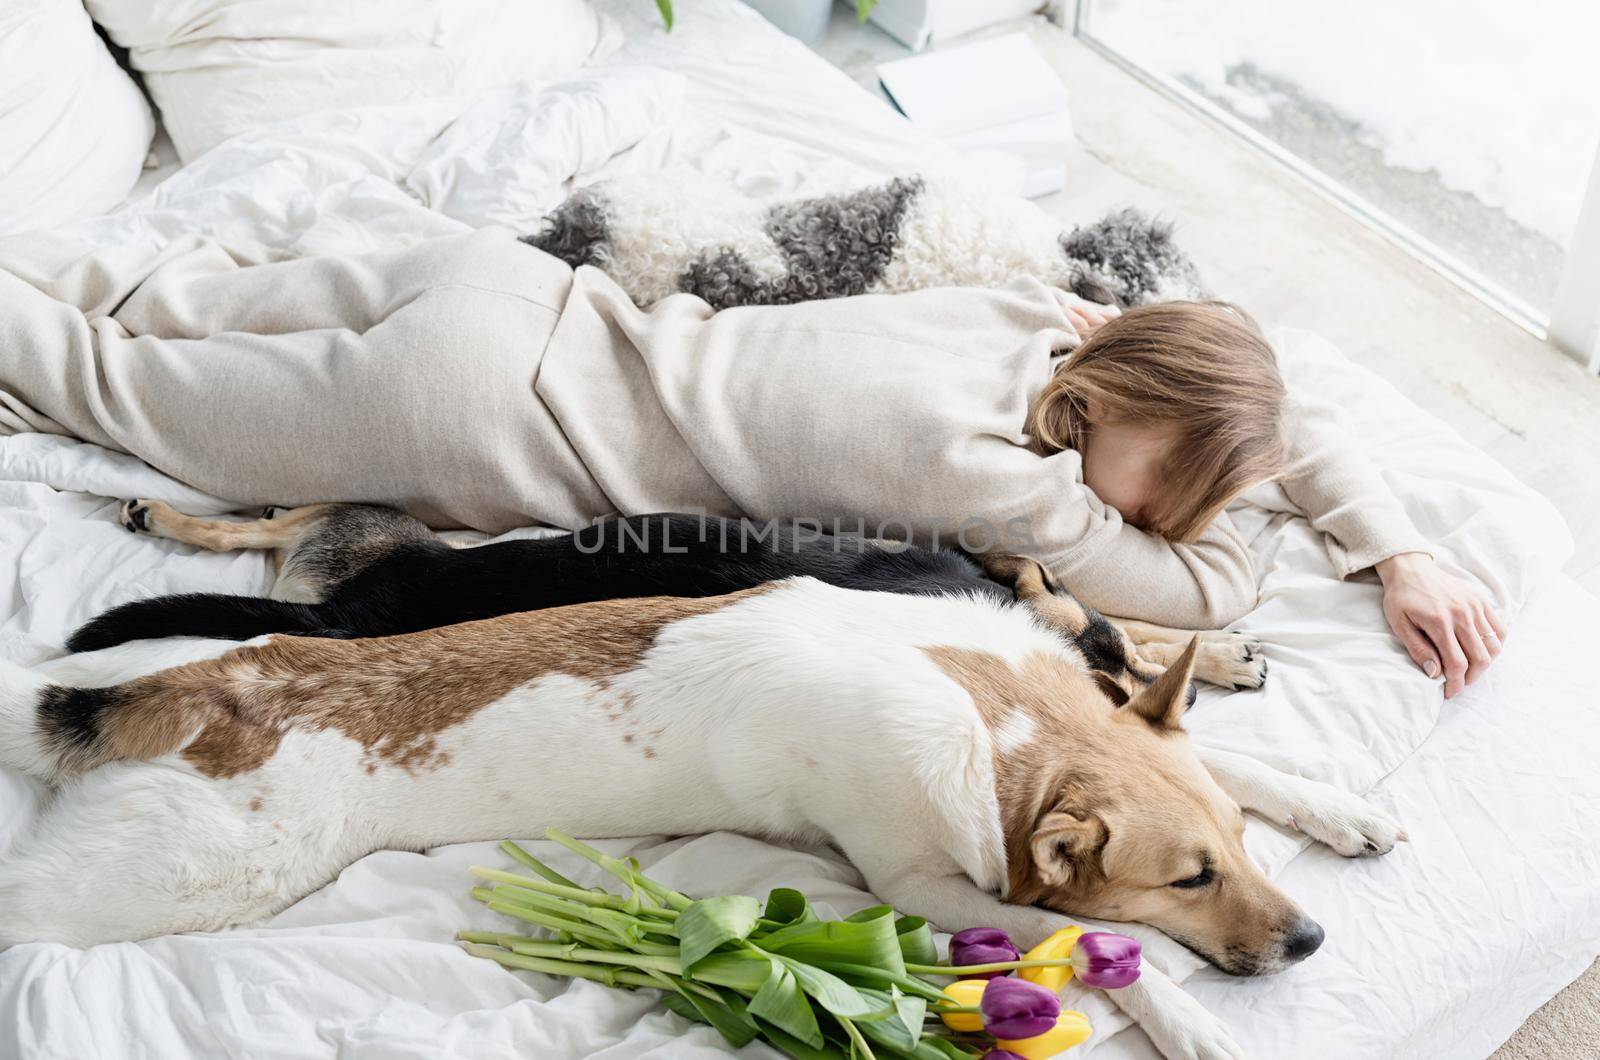 Sleeping young woman wearing pajamas lying in the bed with her dogs